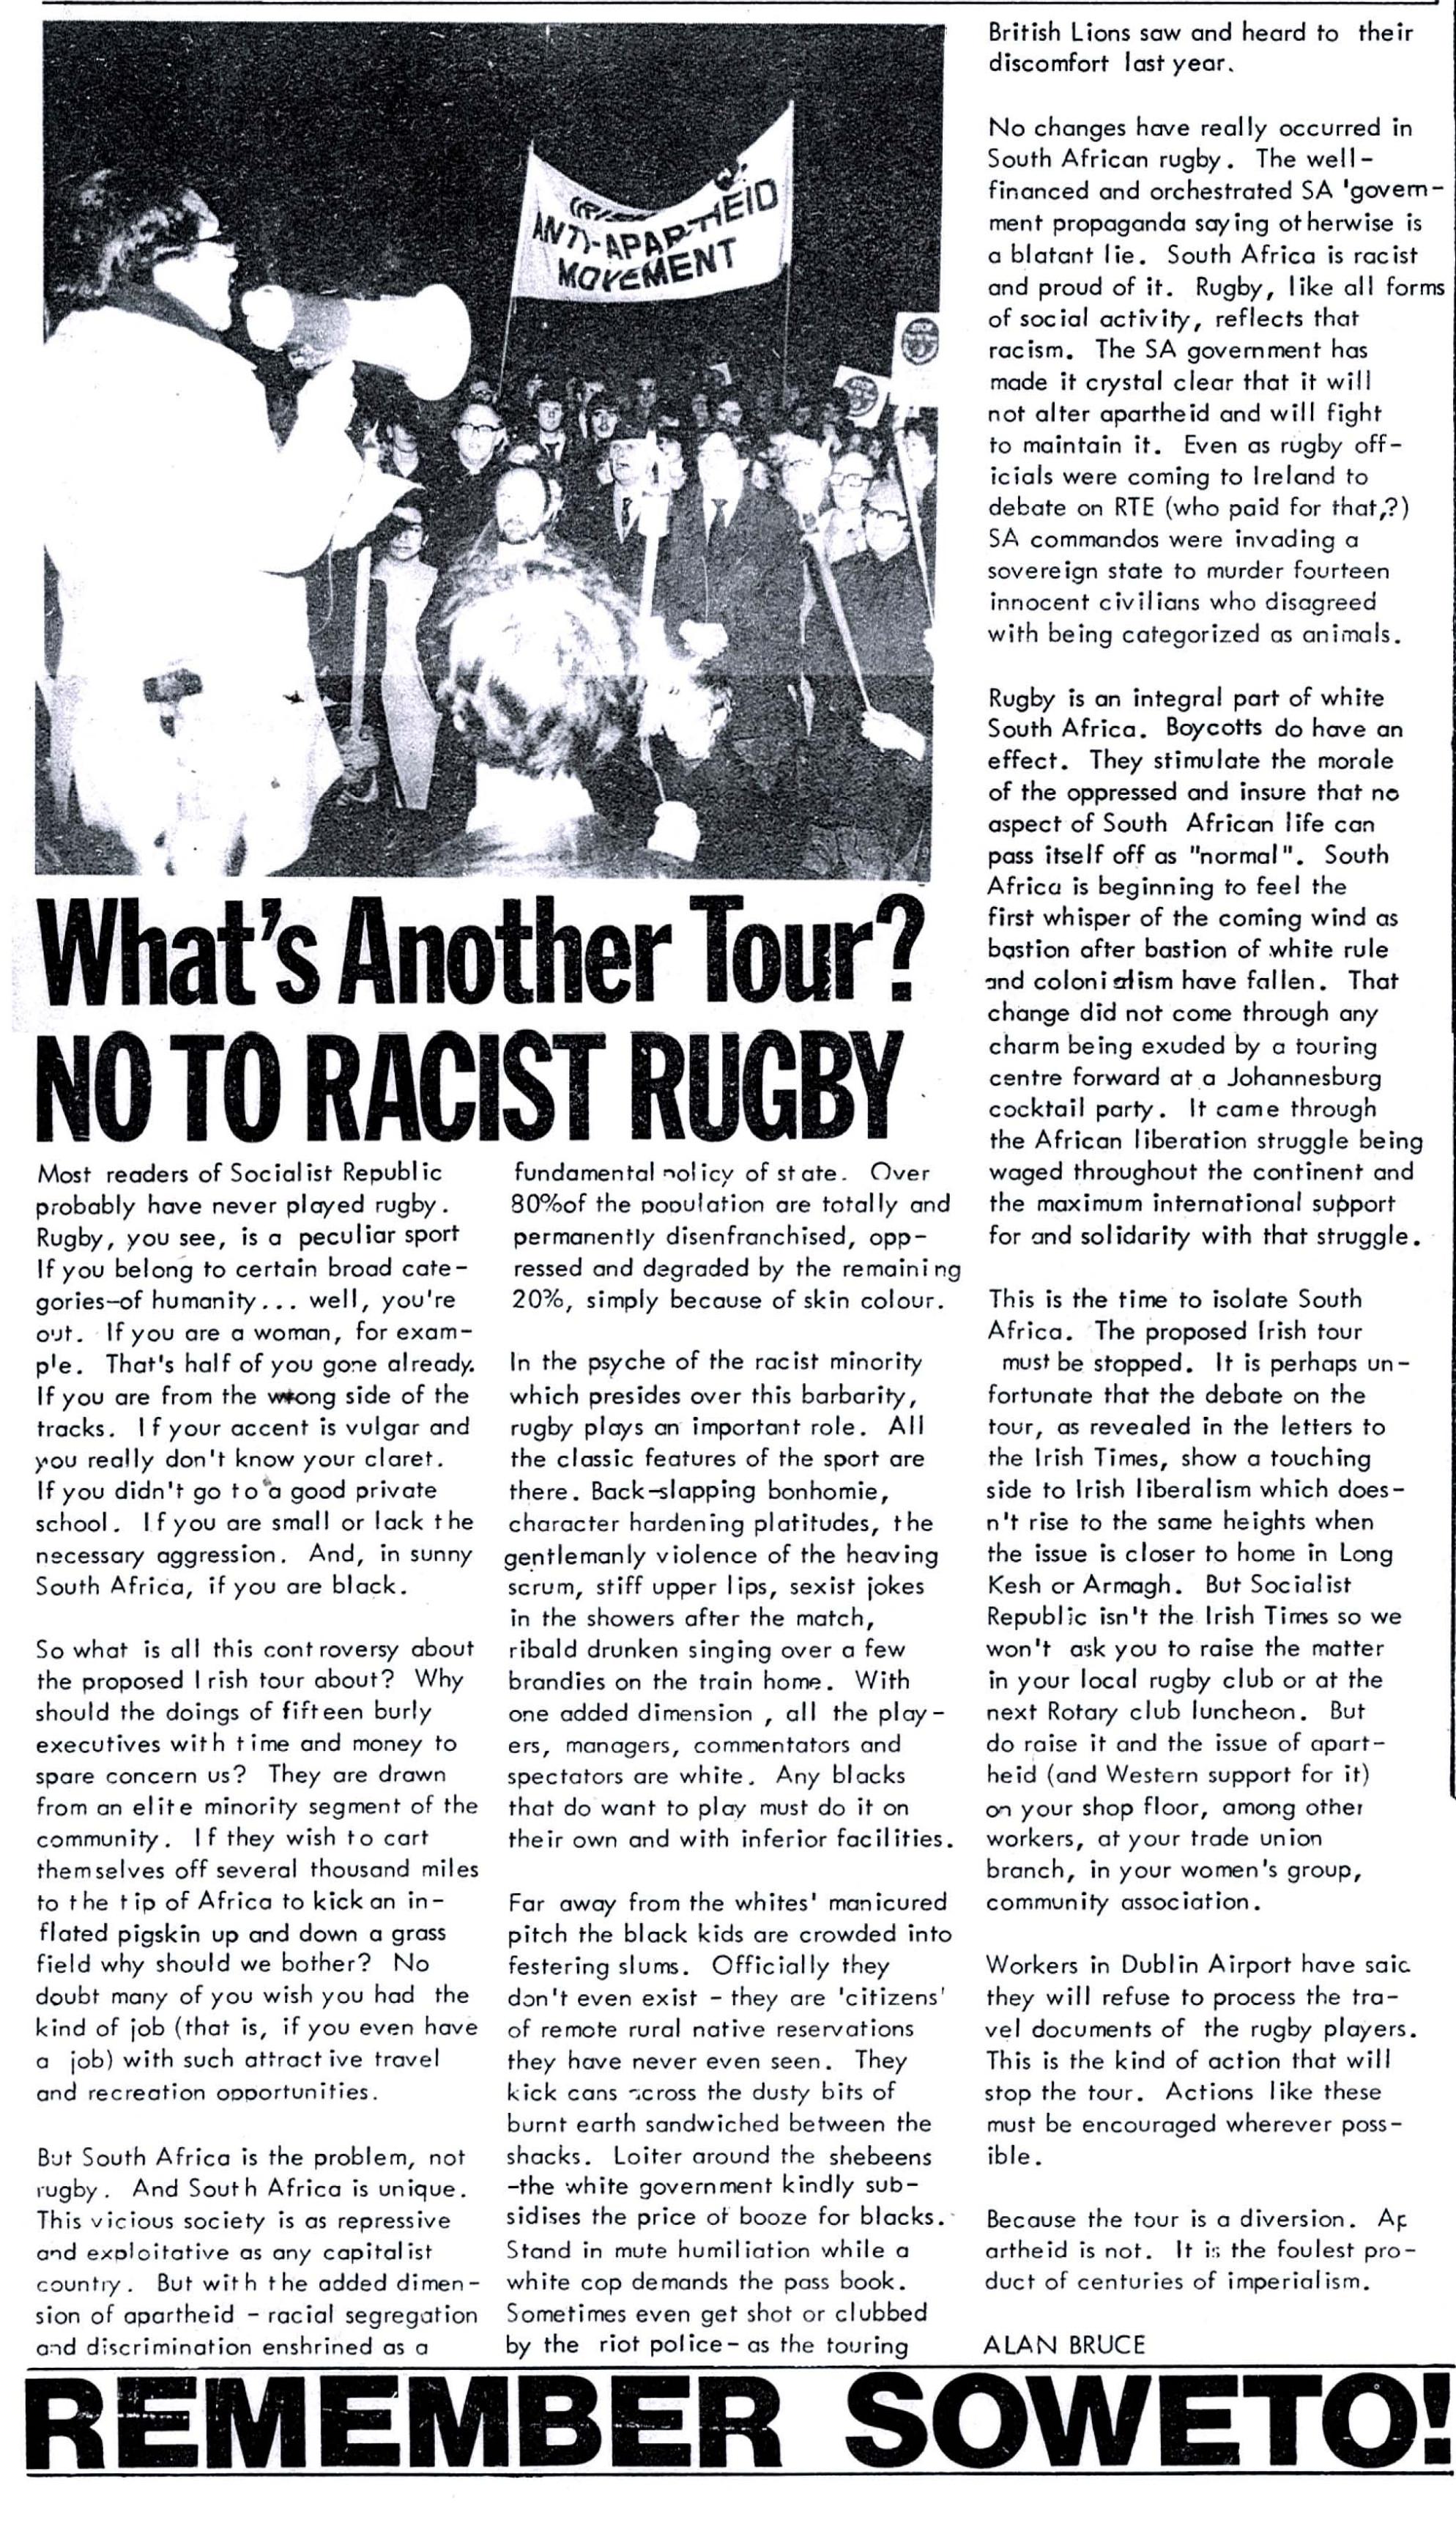 A black-and-white scanned article from Socialist Republic headlined: What's Another Tour? No to Racist Rugby.